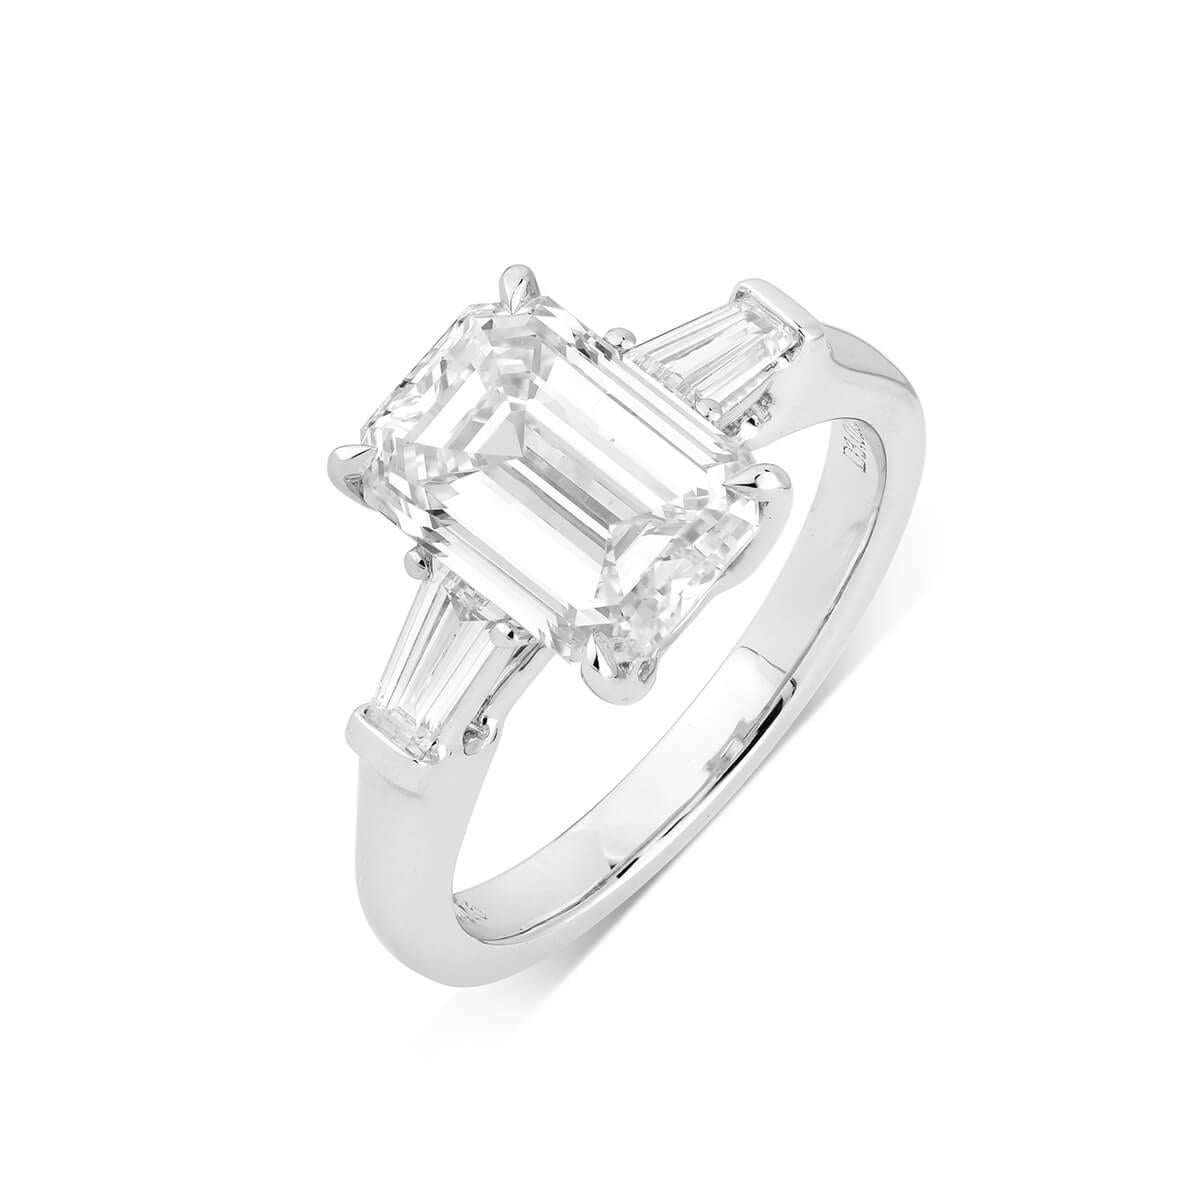 Beautiful Natural White Diamond Engagement Ring. The diamonds are all natural and untreated making up a total of 3.37 Carats. This piece has been expertly crafted using 18 Karat White Gold.
It is GIA certified. 
This item can be adjusted, resized